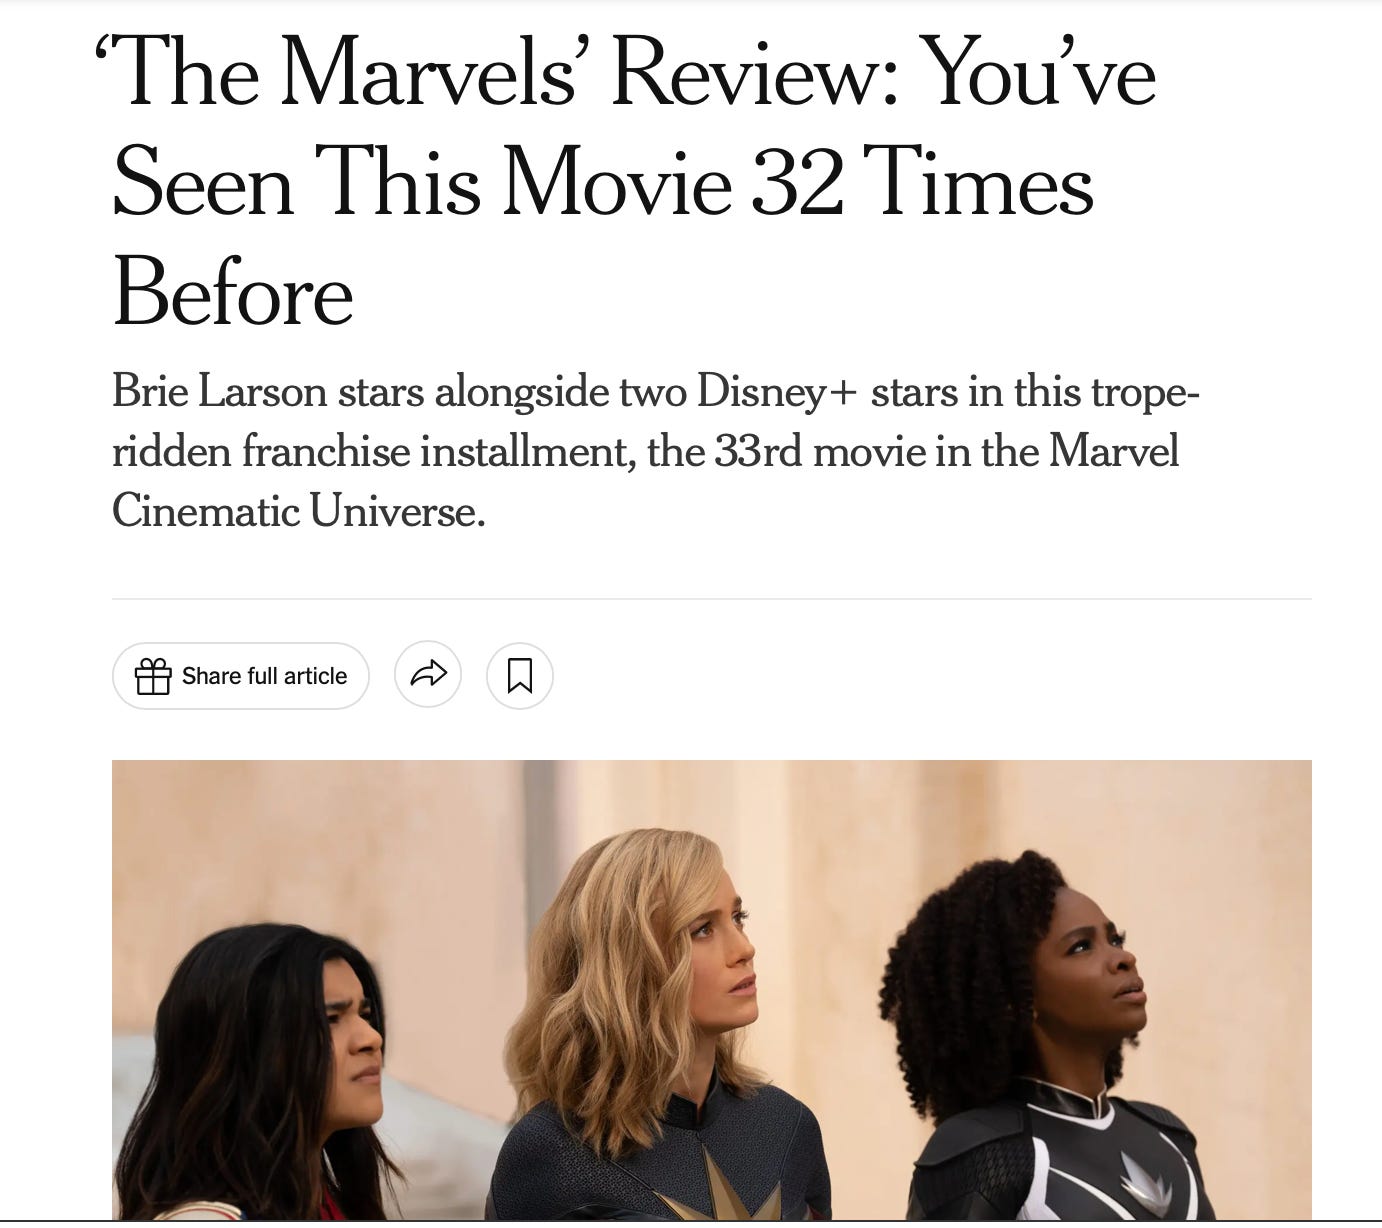 Why I'm going to see The Marvels despite initial reviews